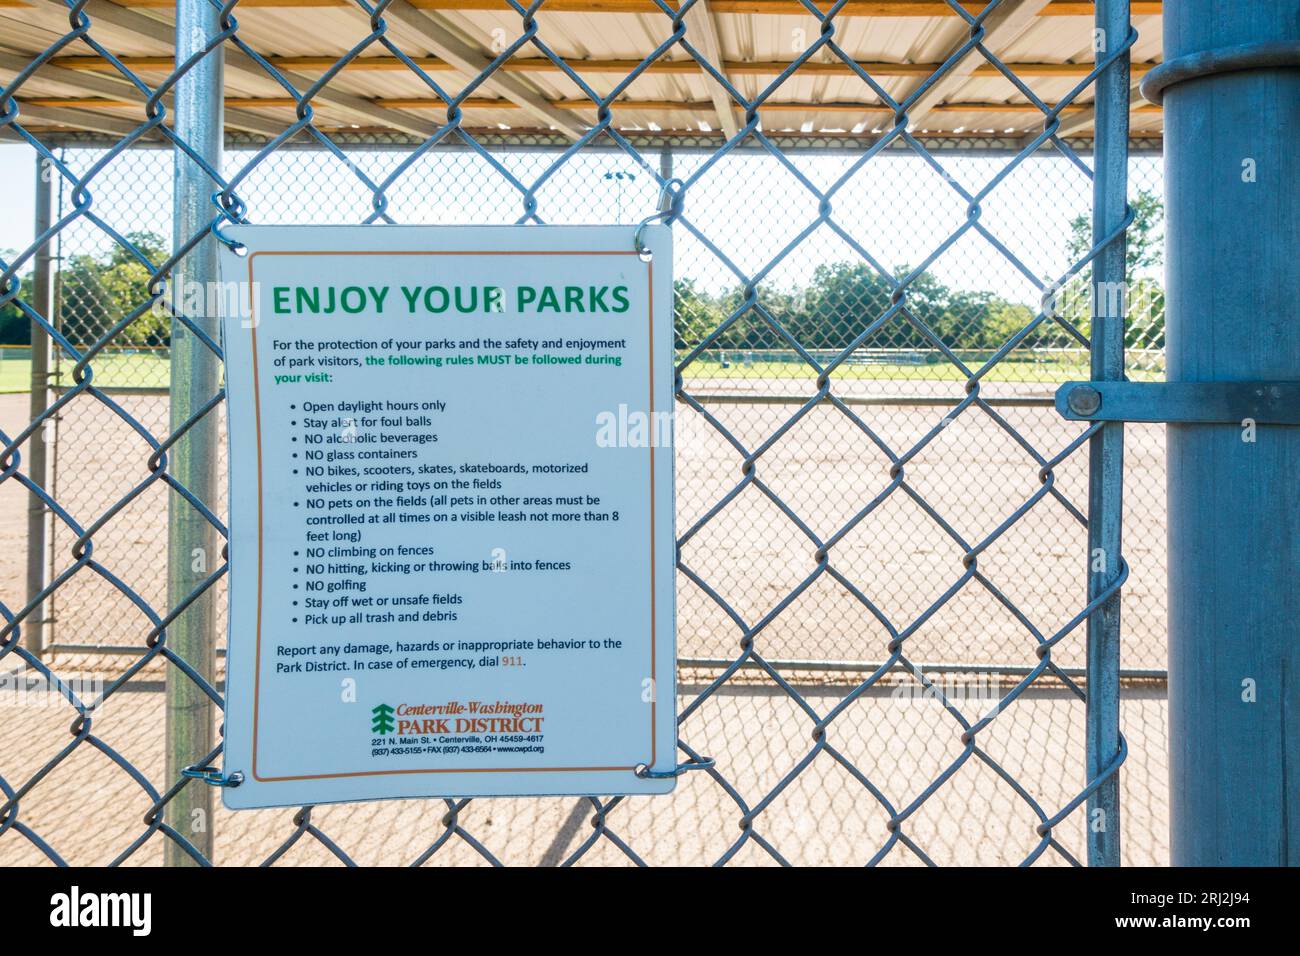 Enjoy your Parks notice on the fence wire in community park Stock Photo